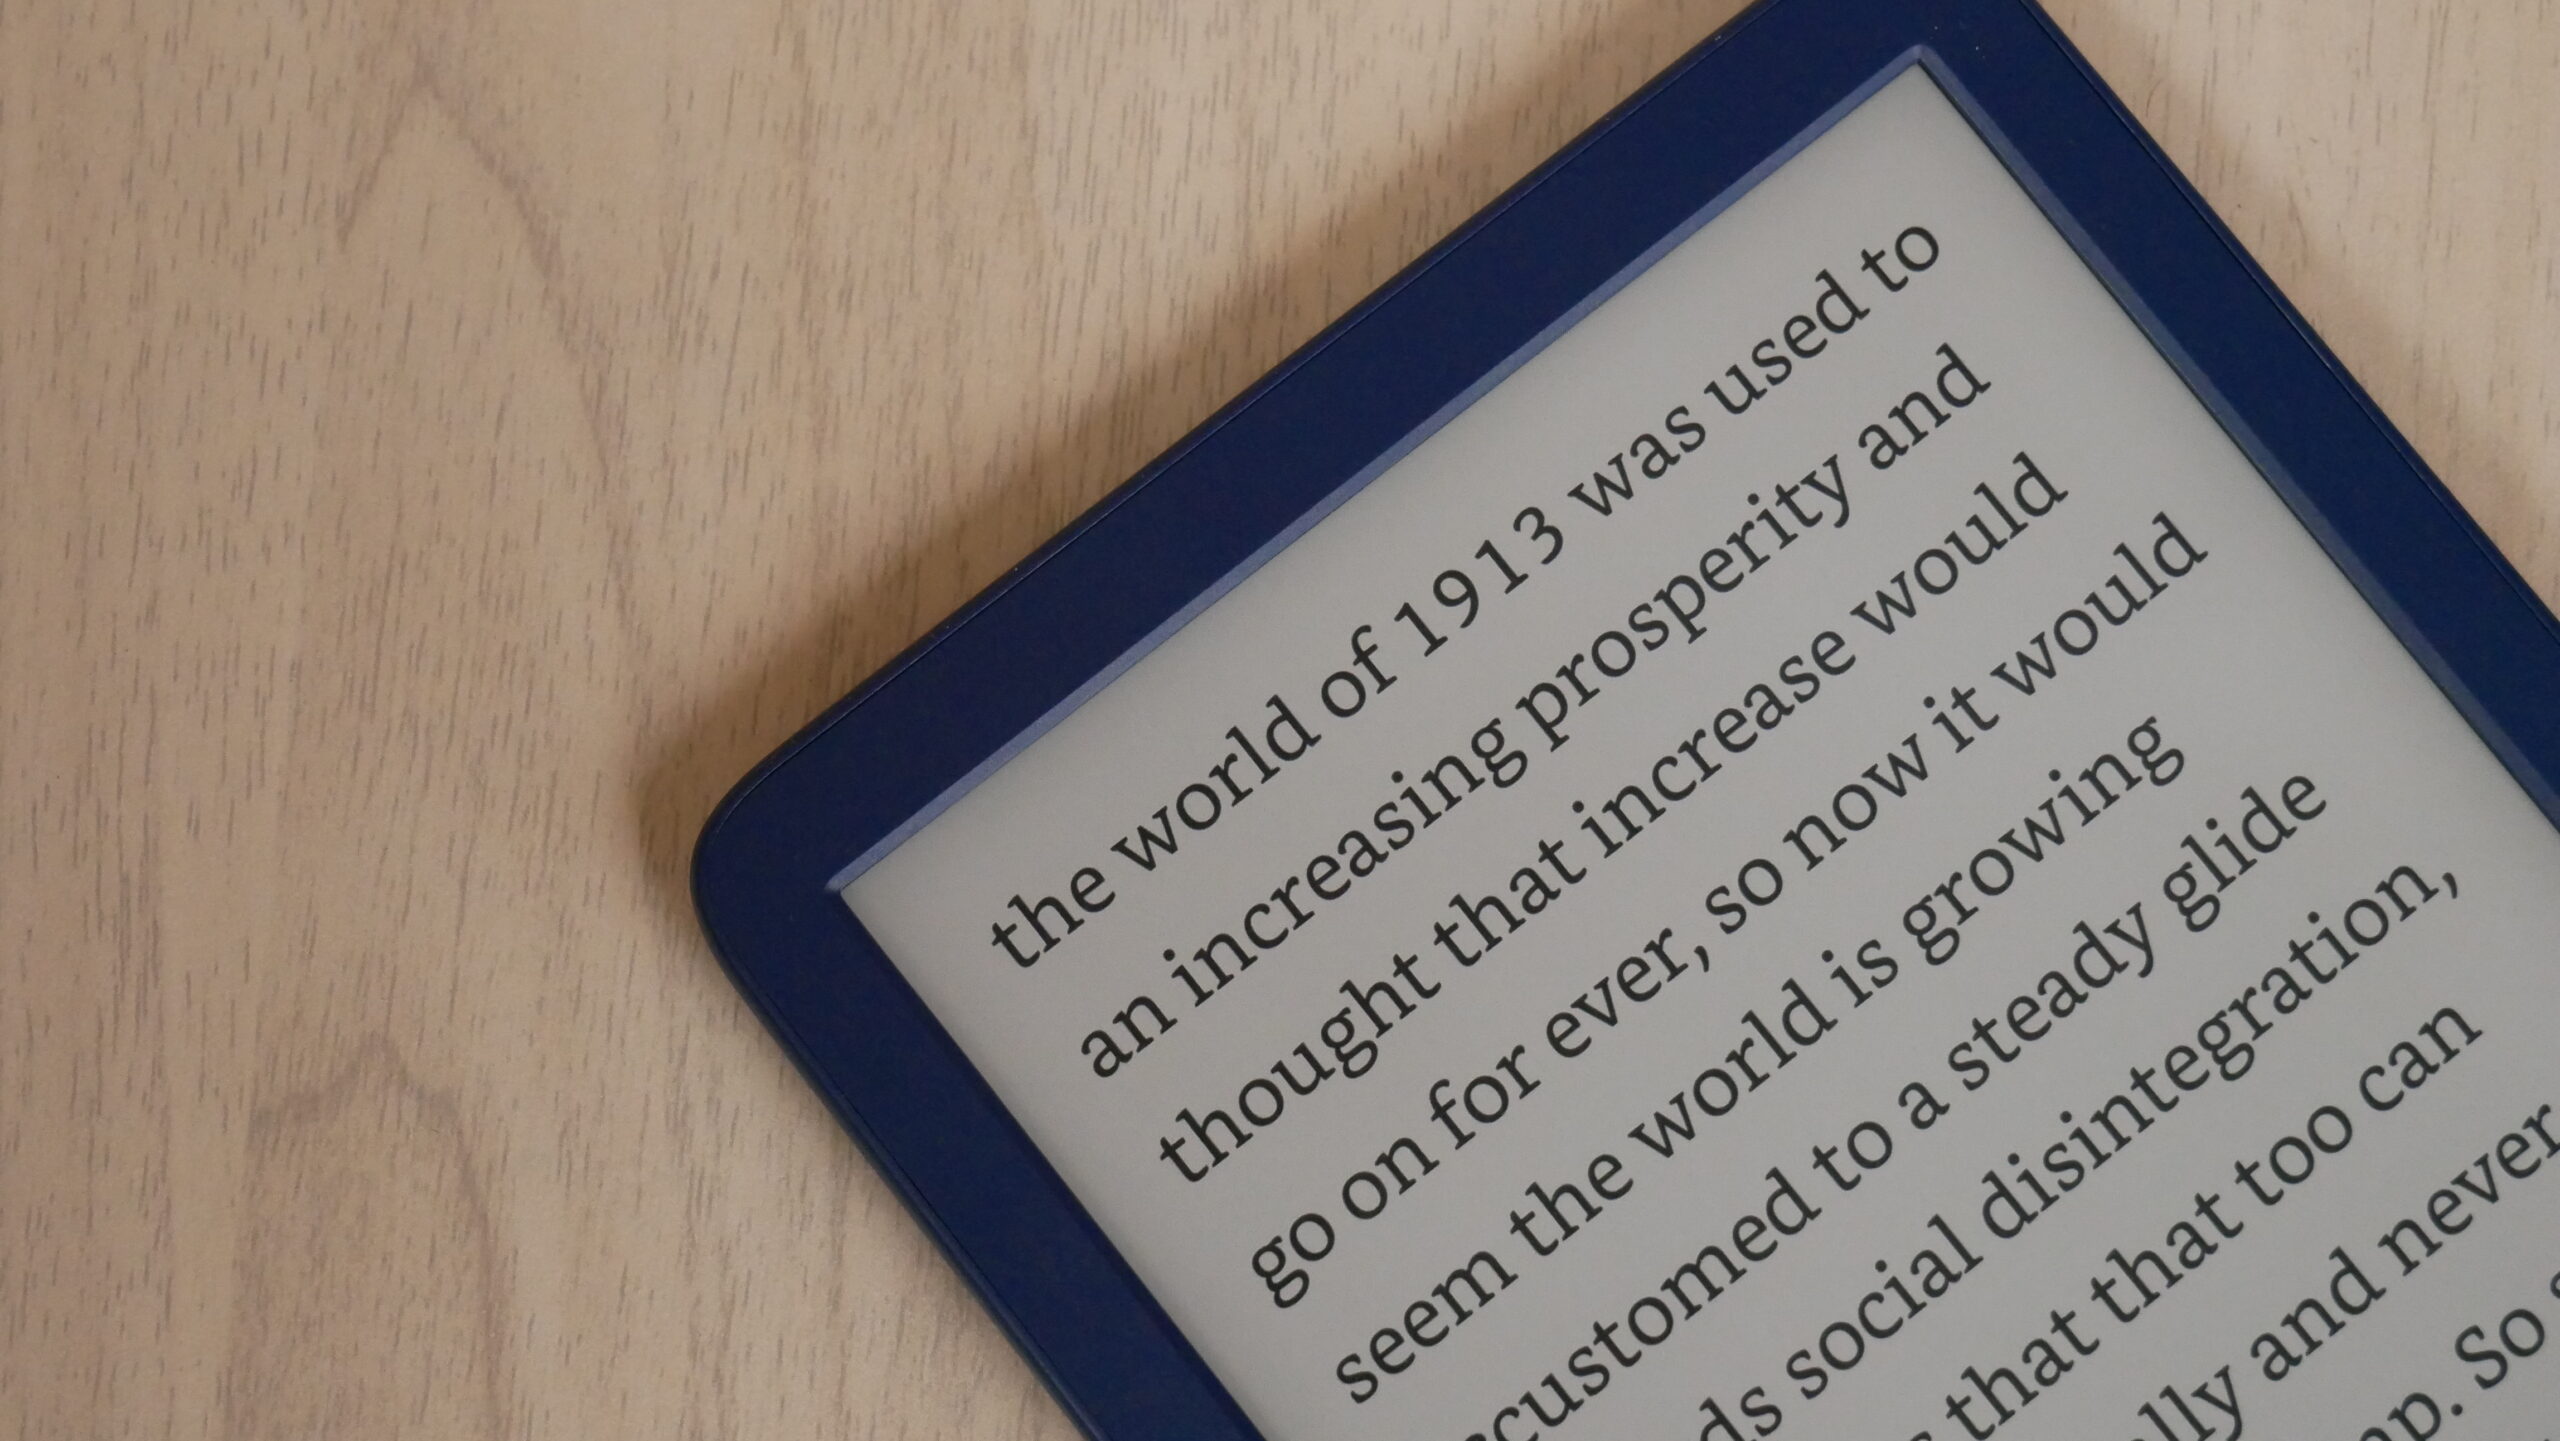 Kindle 11th Gen Review: Bridges the gap between the base model and  Paperwhite – Firstpost